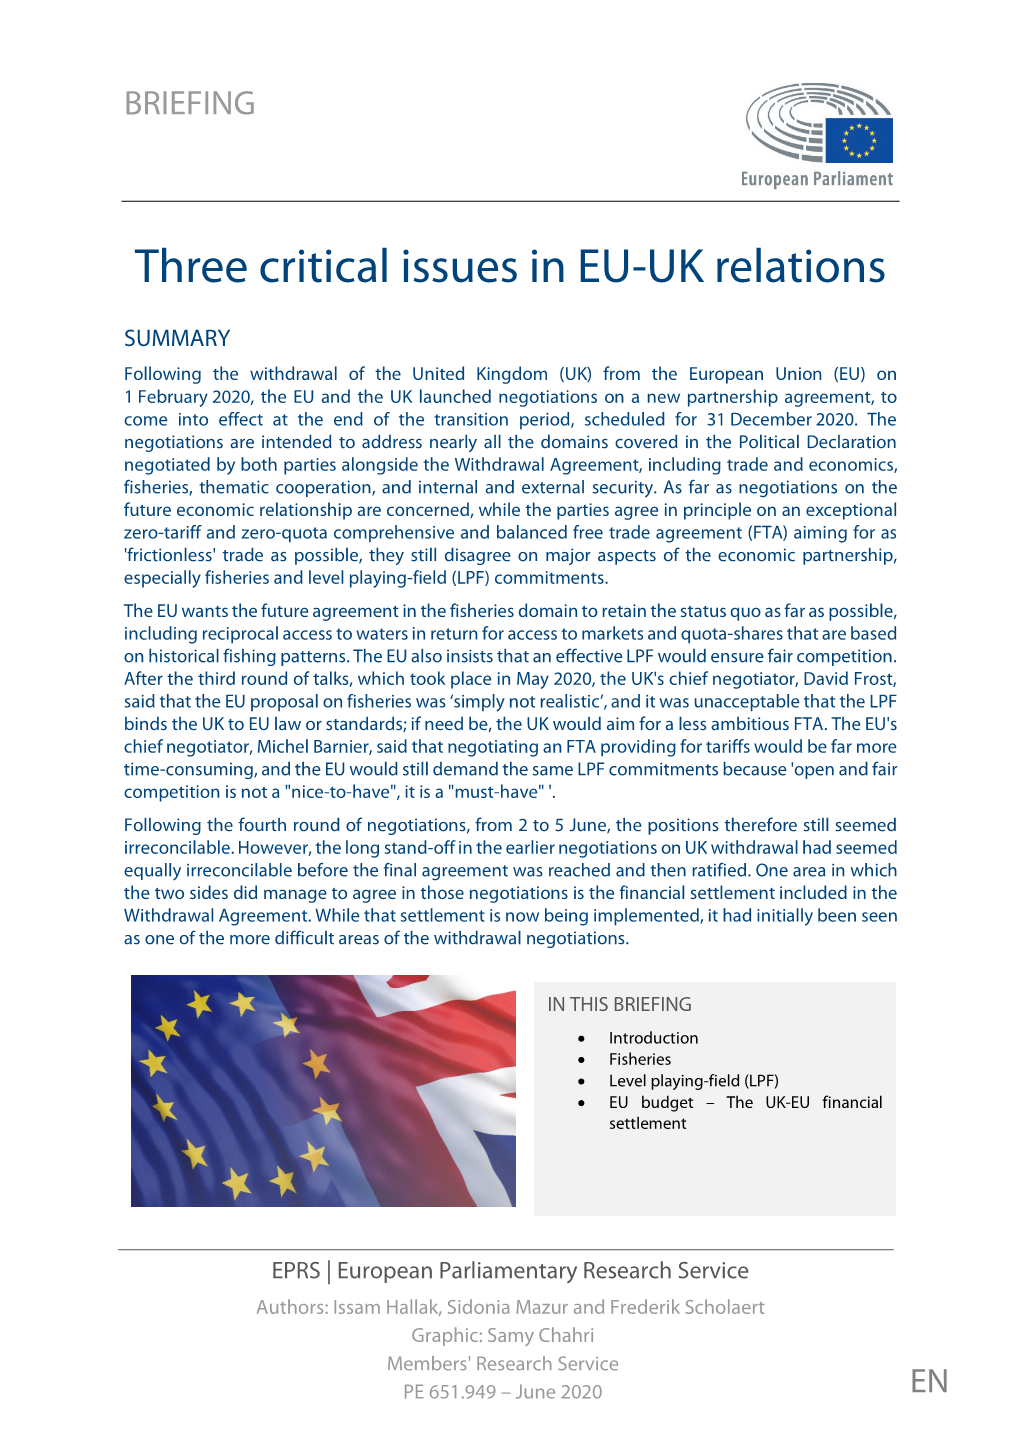 Three Critical Issues in EU-UK Relations